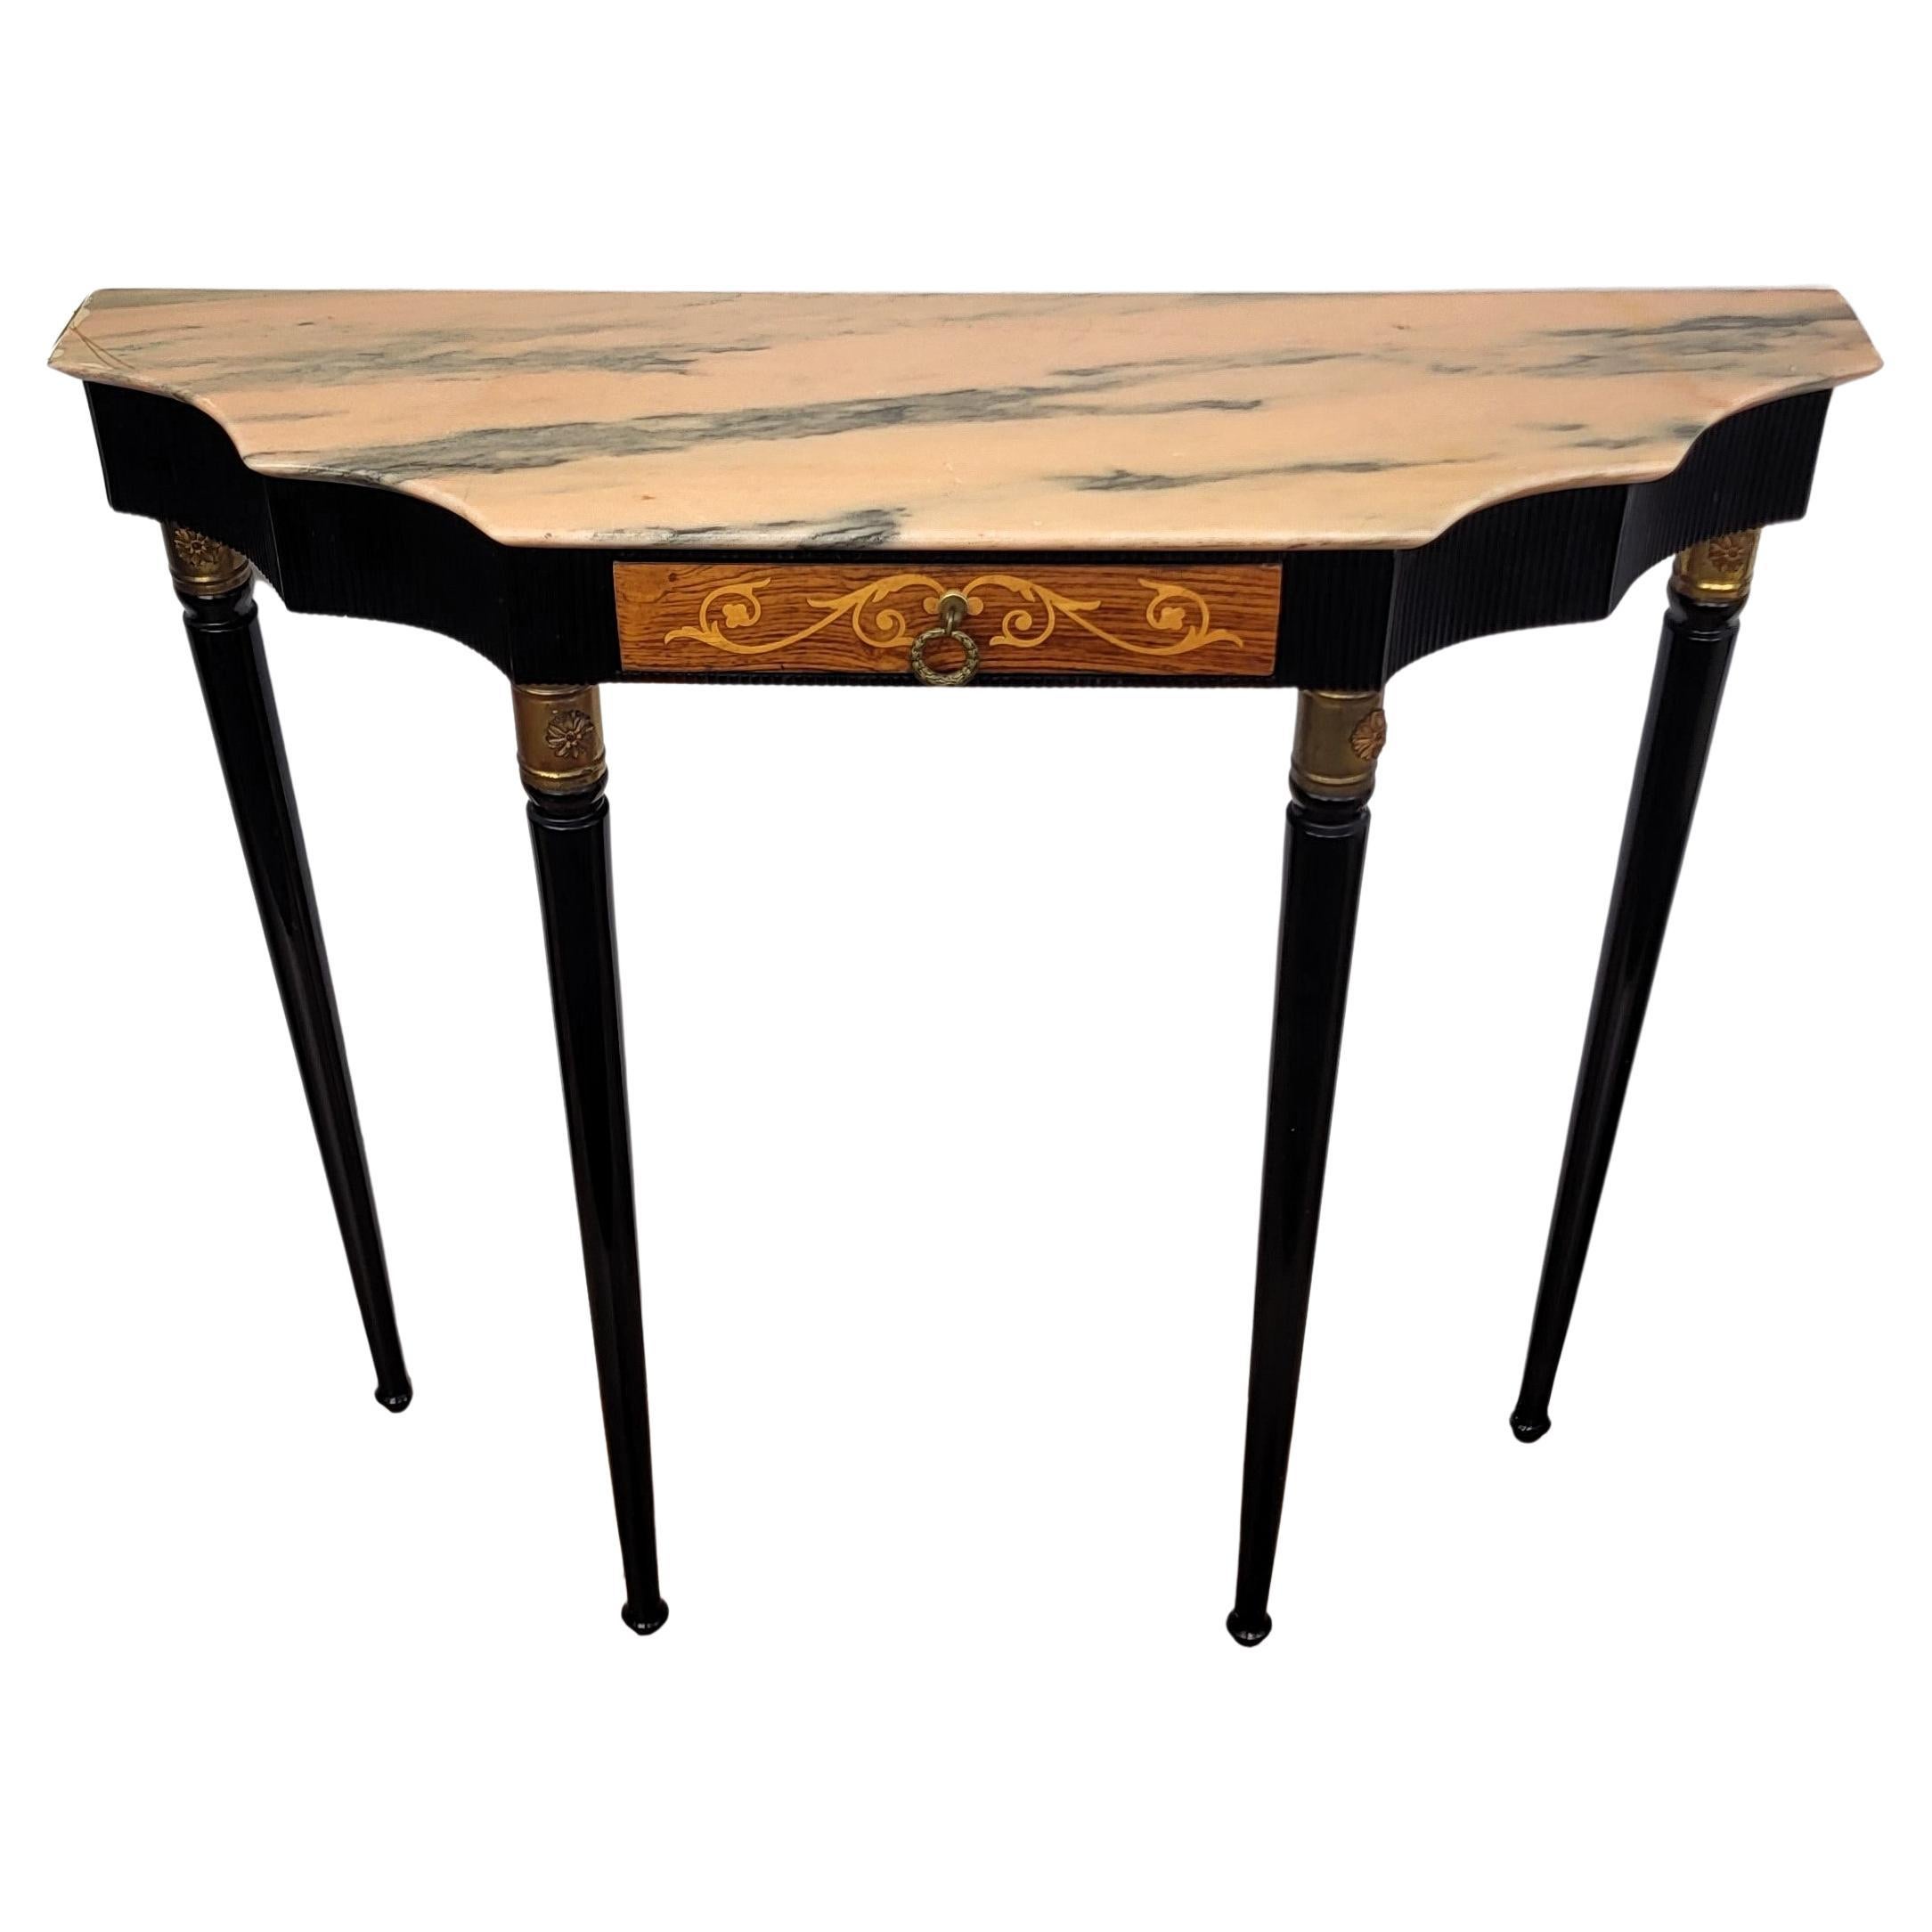 1950s Midcentury Italian Black Wood Brass Wall Console Table with Marble Top For Sale